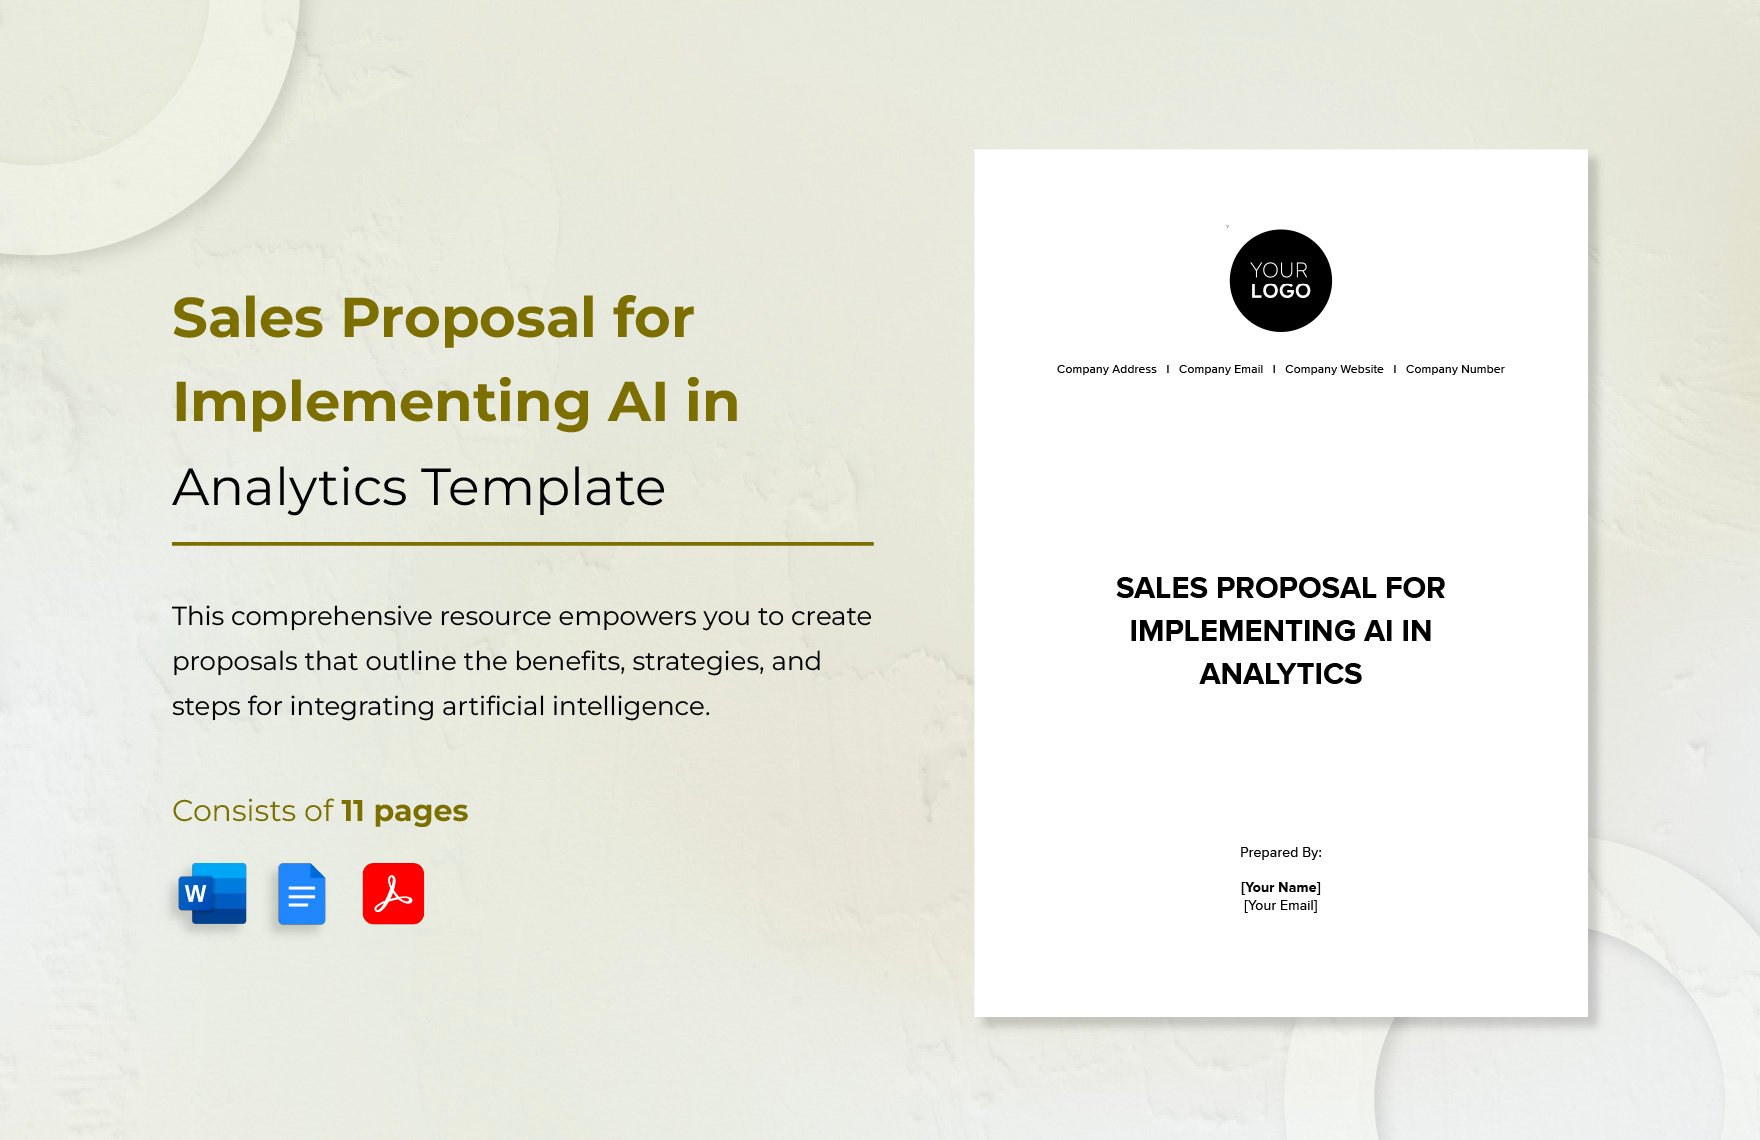 Sales Proposal for Implementing AI in Analytics Template